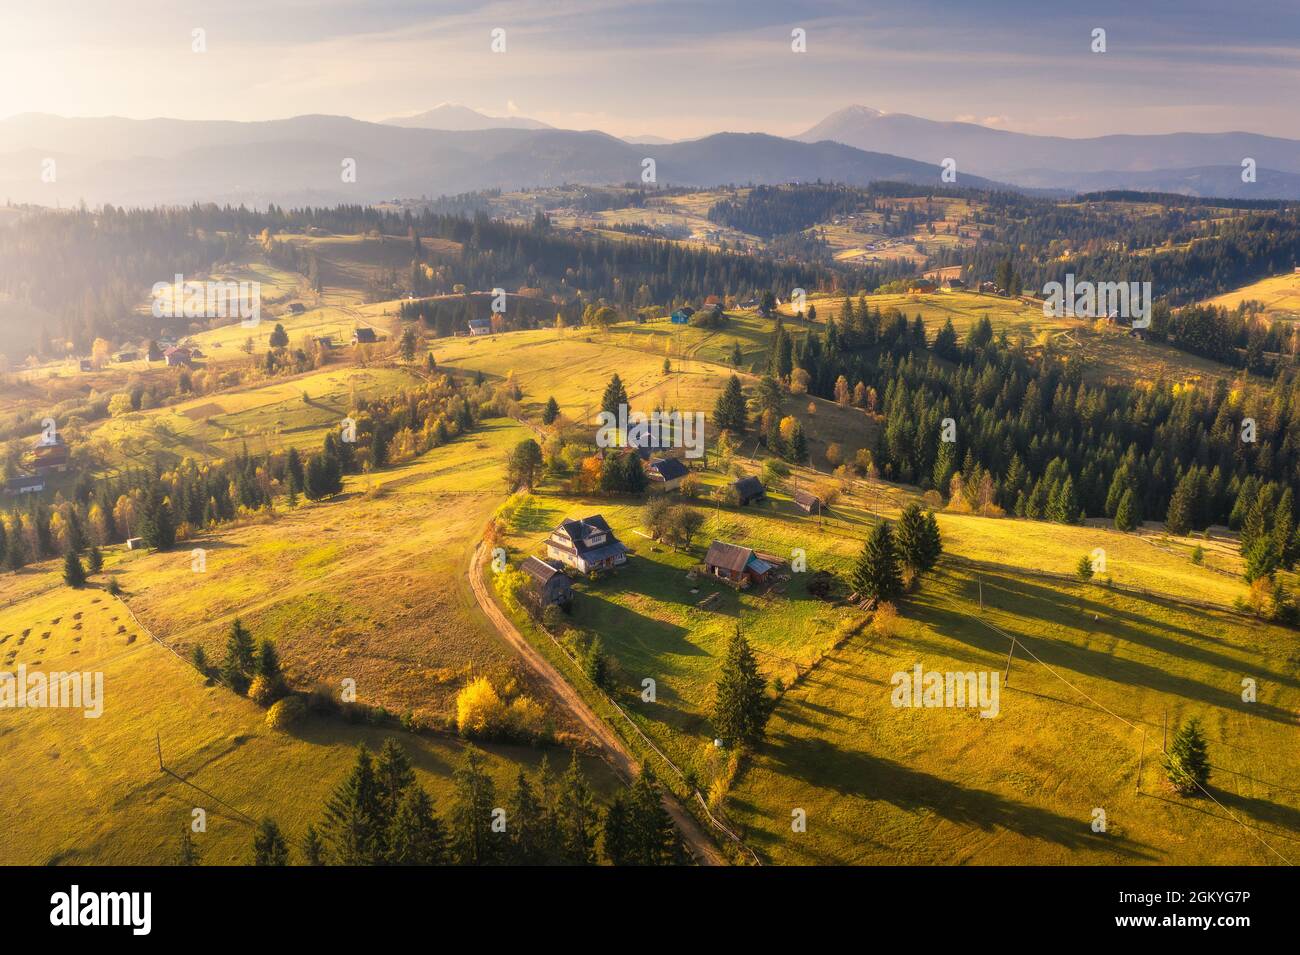 Aerial view of beautiful village in mountains at sunset Stock Photo